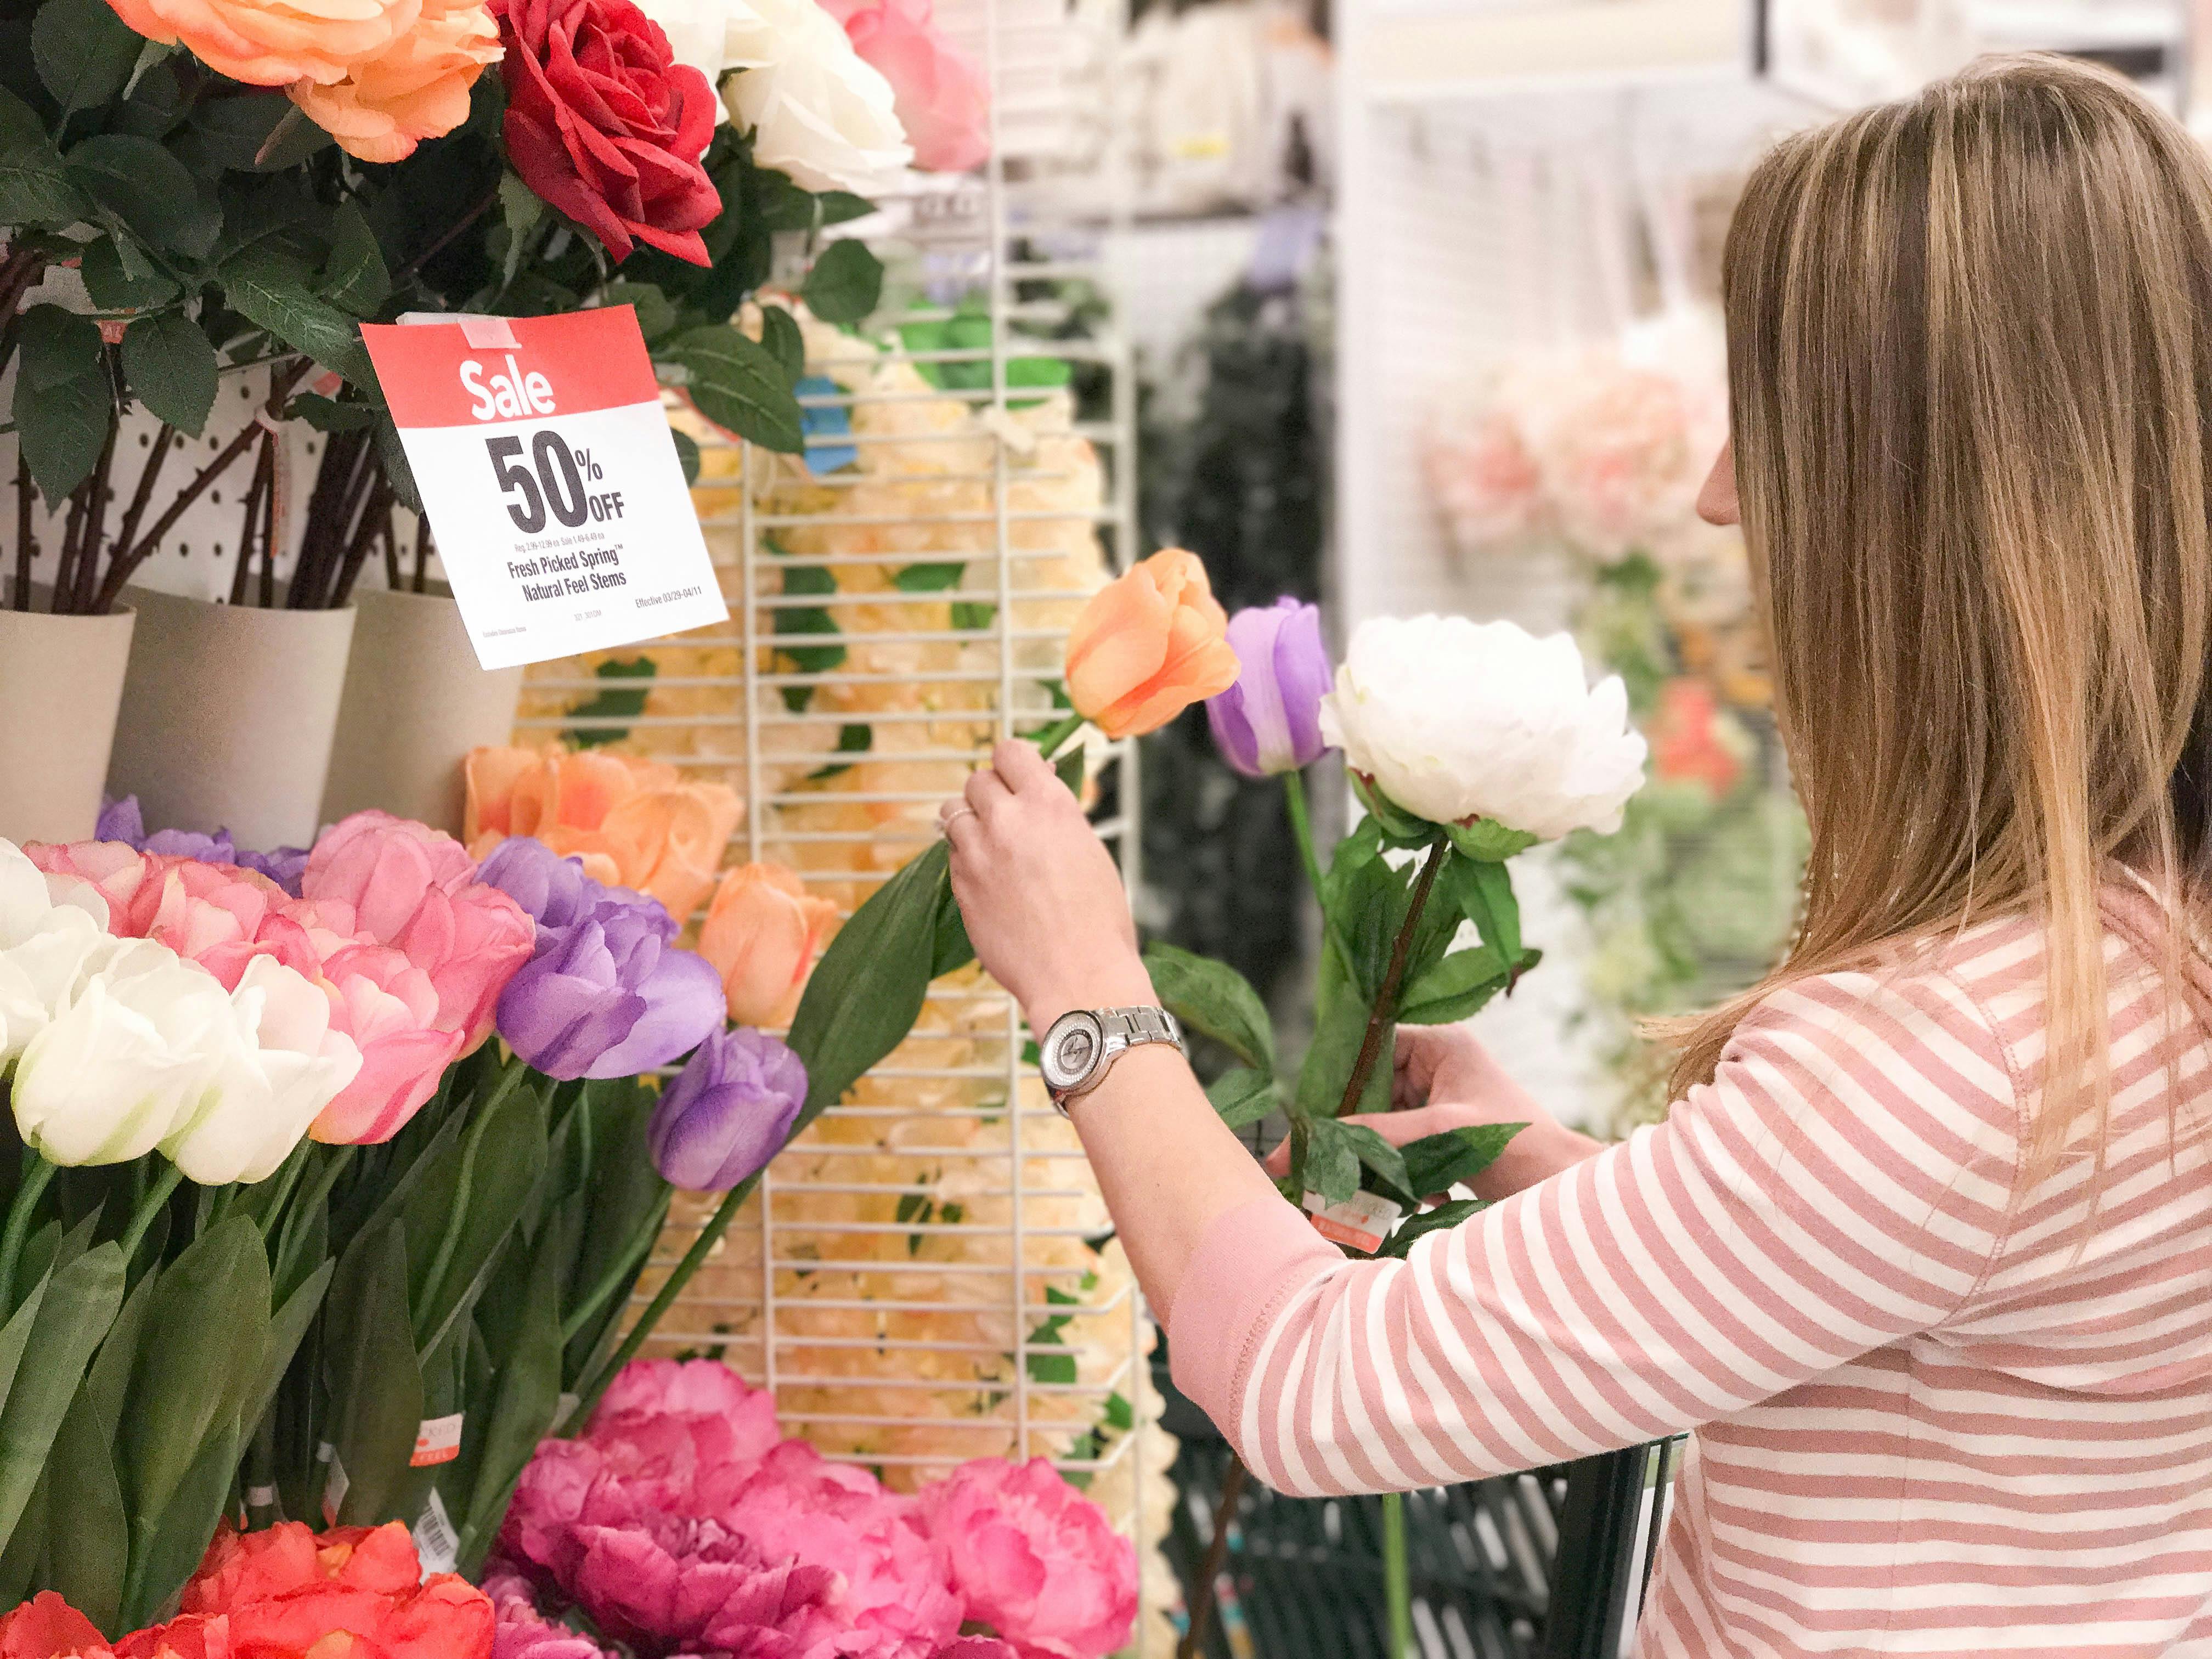 woman picking up a flower from a bunch of flowers and a sign says 50% off